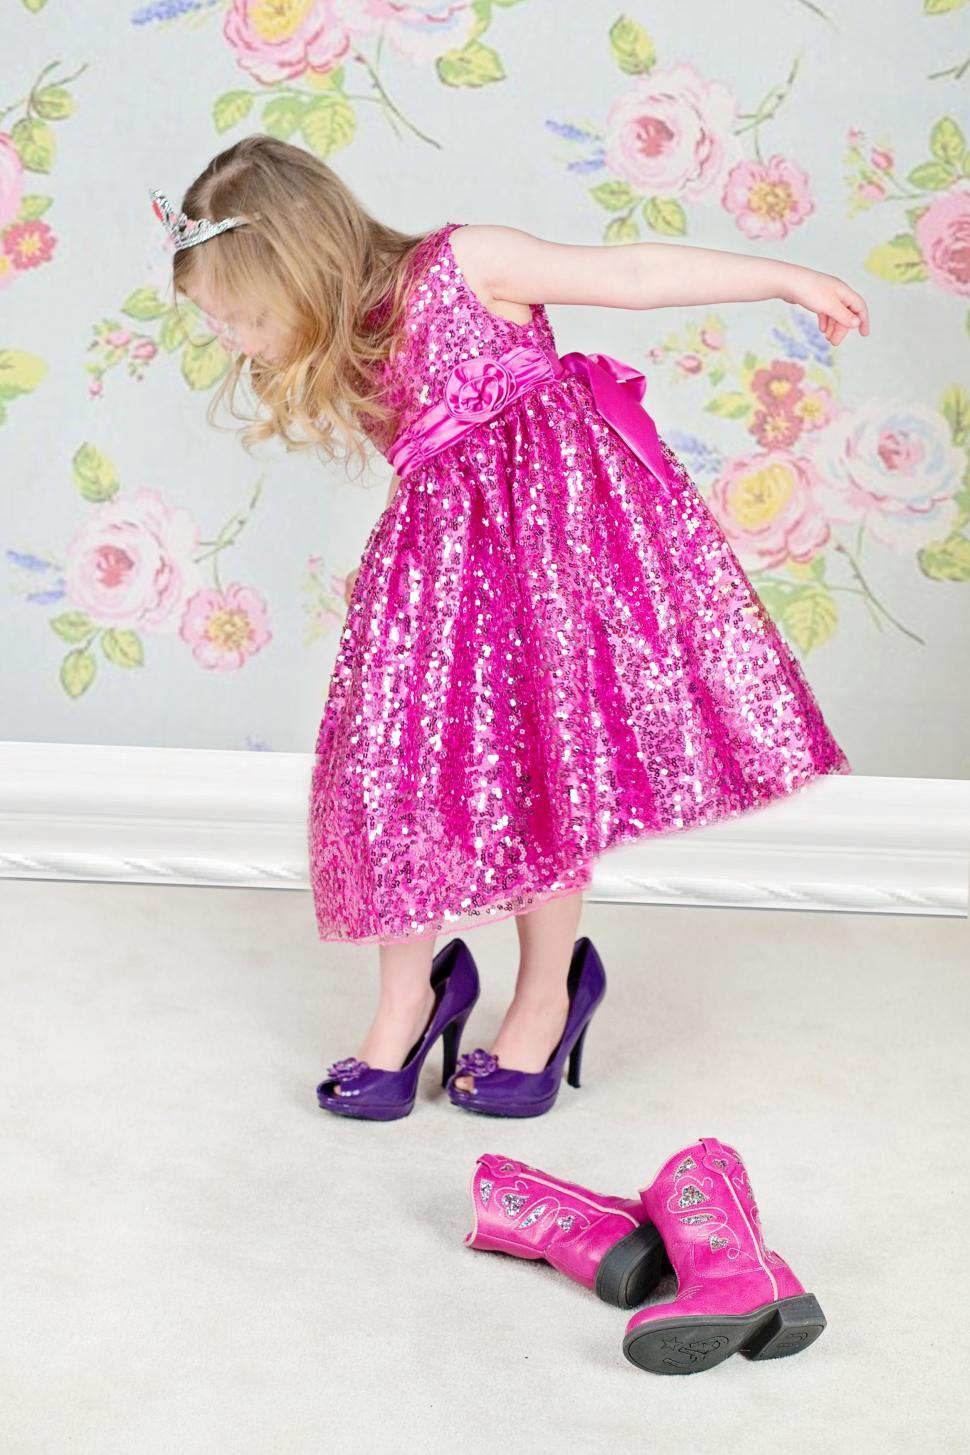 Free Image of Little Girl in pink sequin dress 